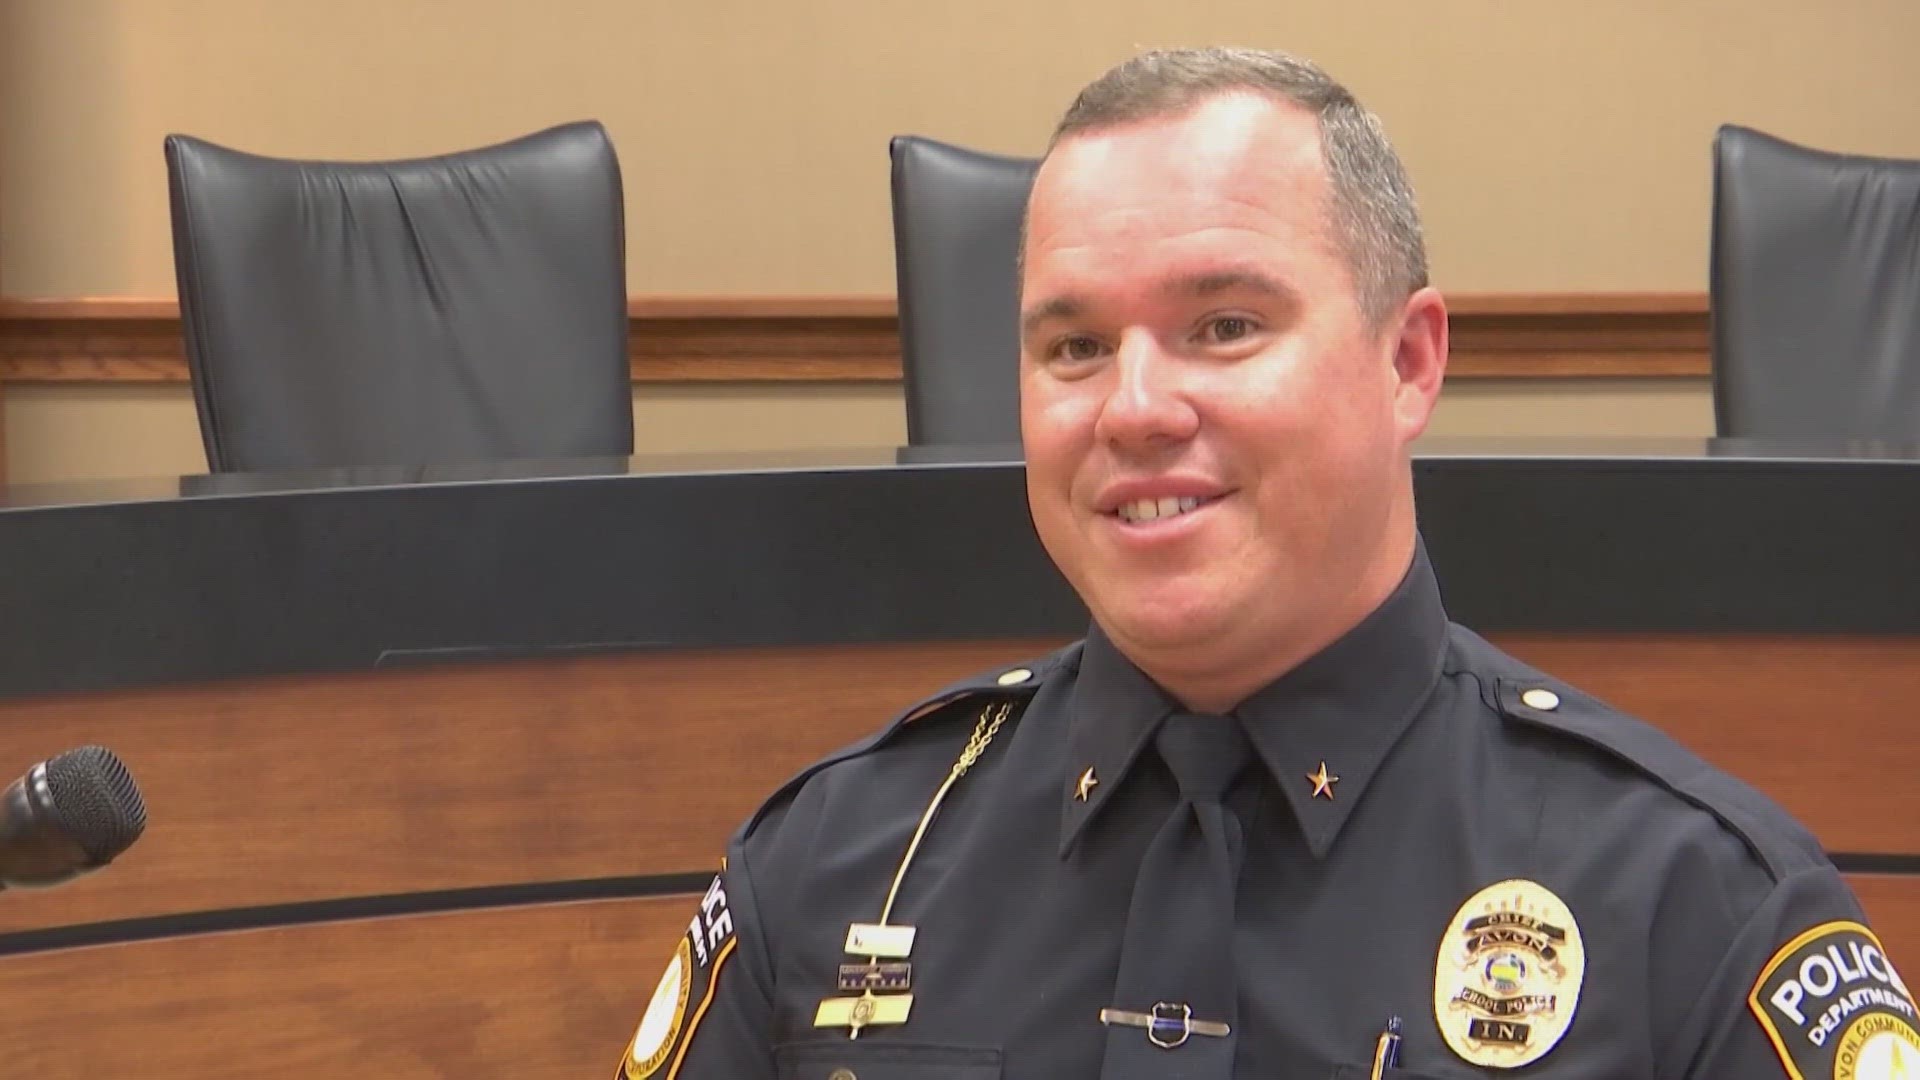 13 Investigates previously reported Chase Lyday resigned from his position as Avon school's first police chief last fall while he was under investigation.